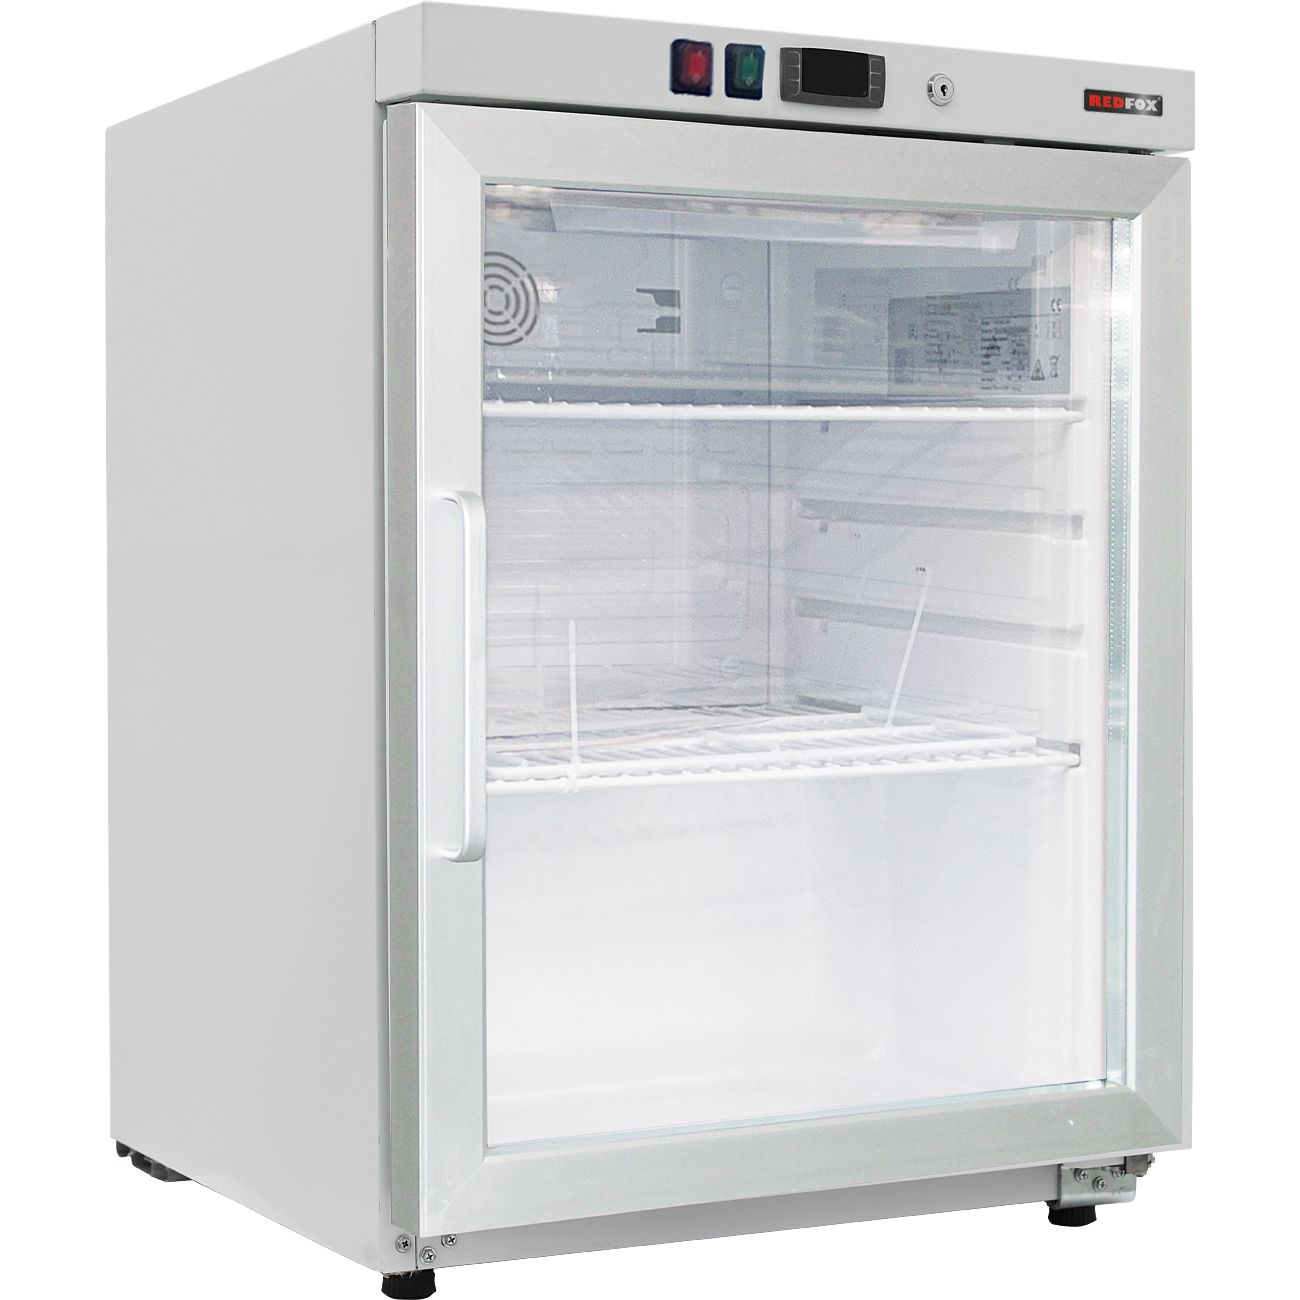 Cooling cabinet 130 l, glass door, white | REDFOX - DRR 200/G